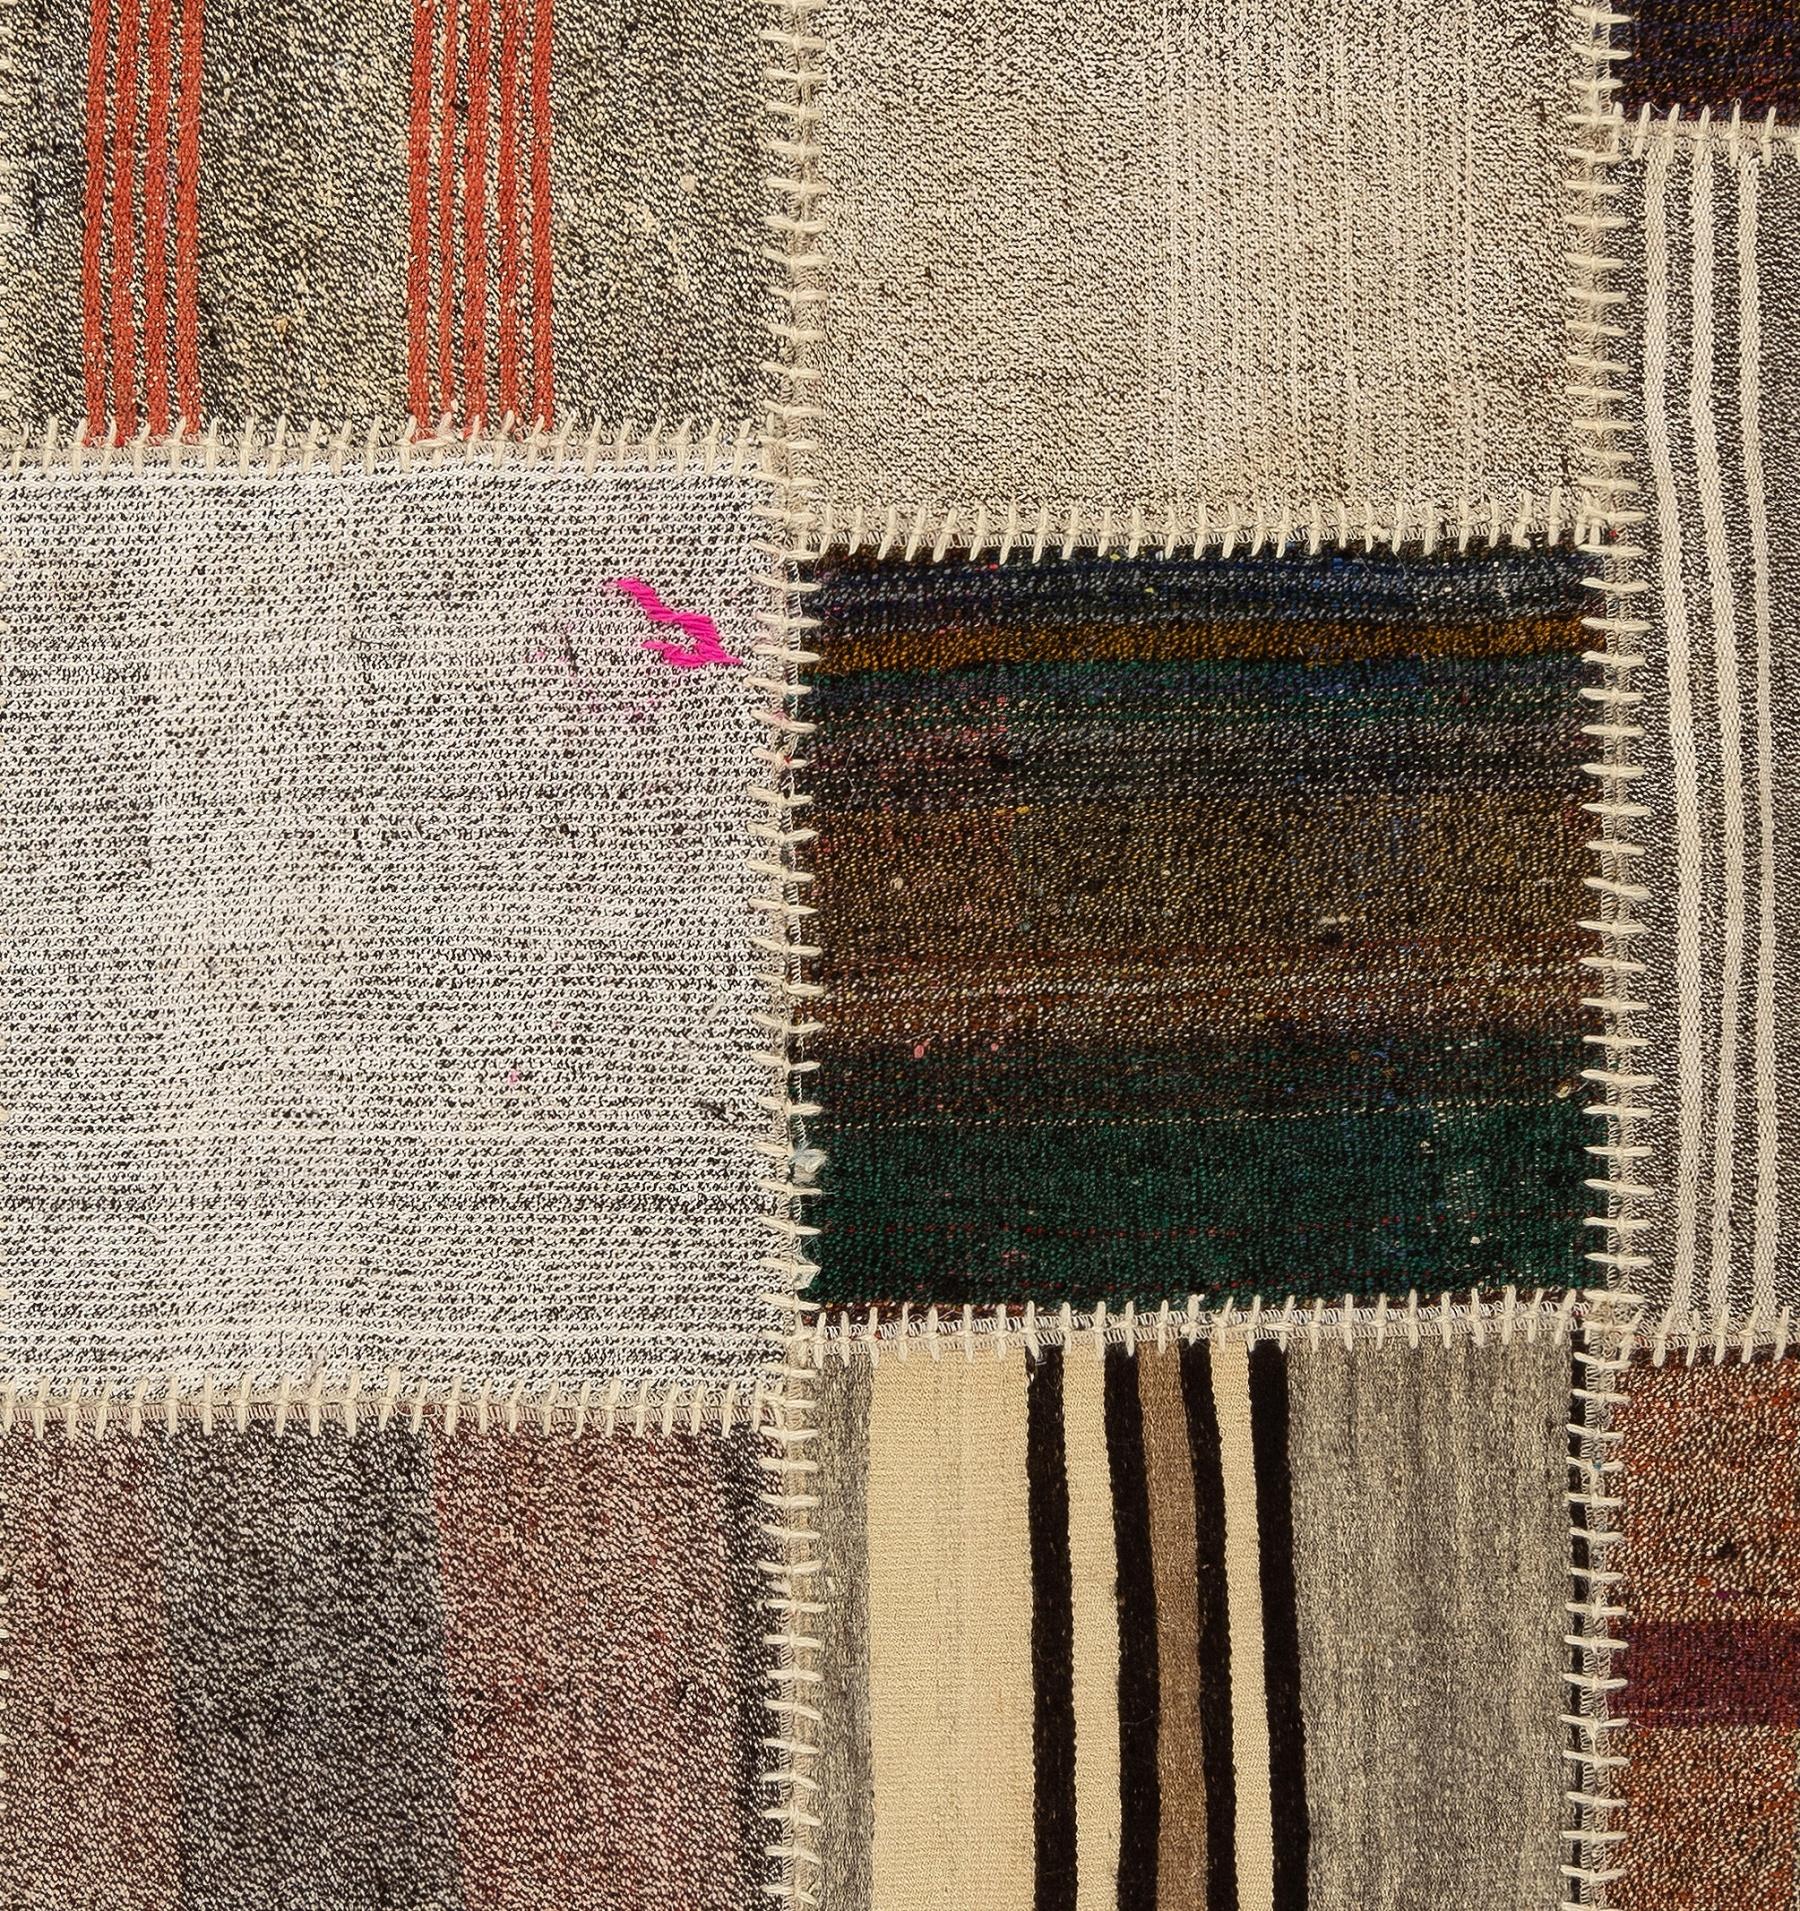 Hand-Woven  5.9x8.4 ft Hand-Made Anatolian Patchwork Kilim Rug 'Flat-Weave', Floor Covering For Sale